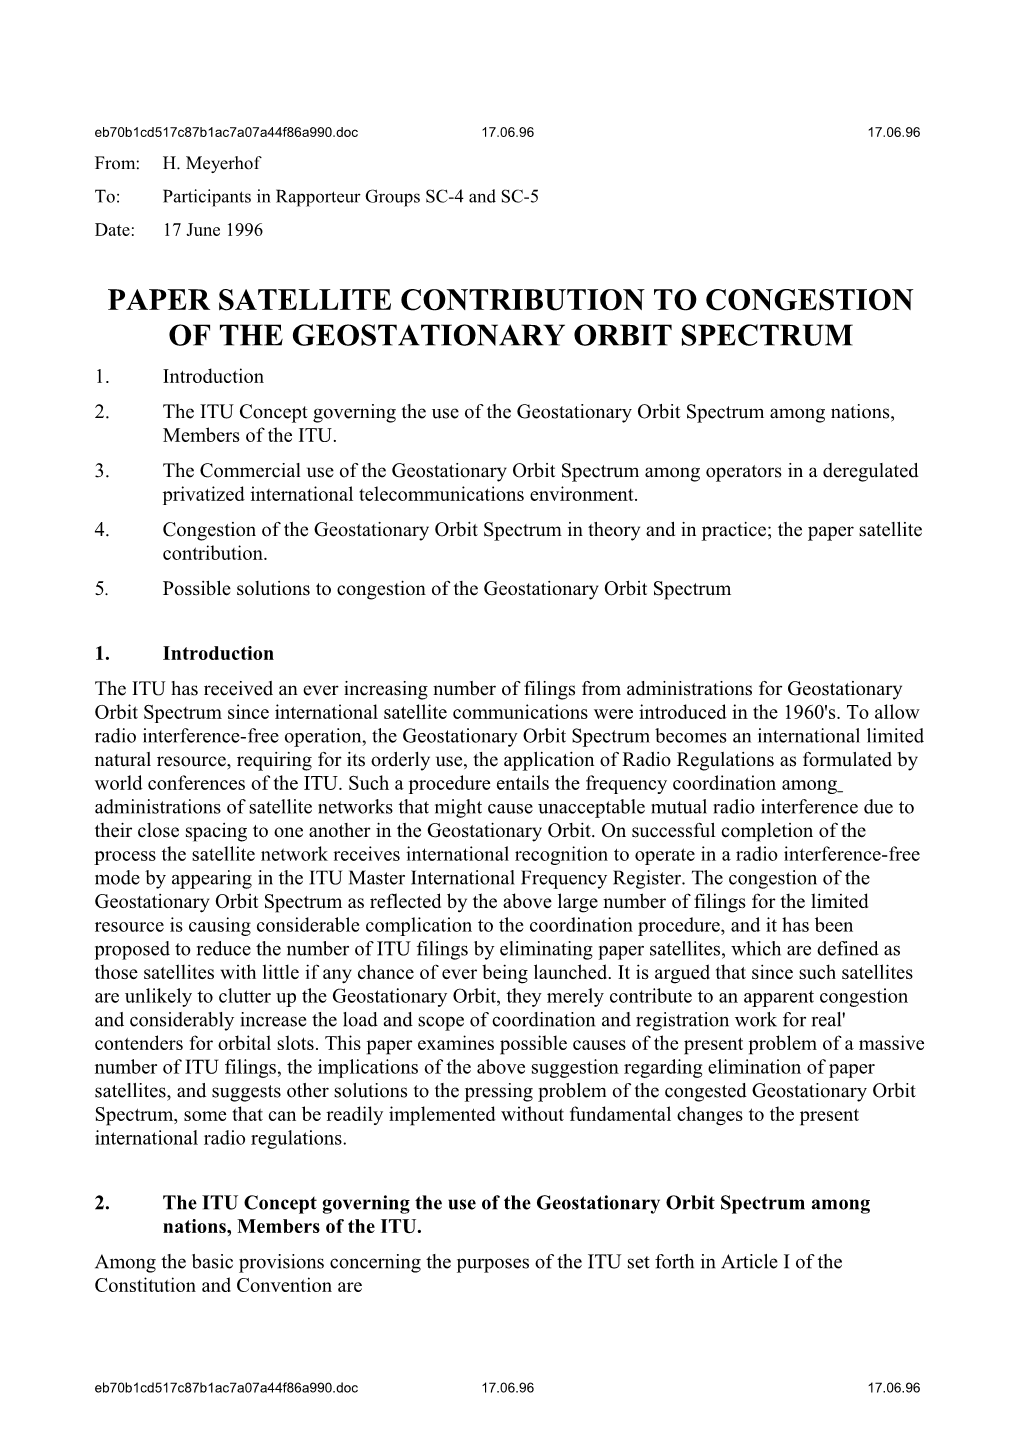 Paper Satellite Contribution to Congestion of the Geostationary Orbit Spectrum